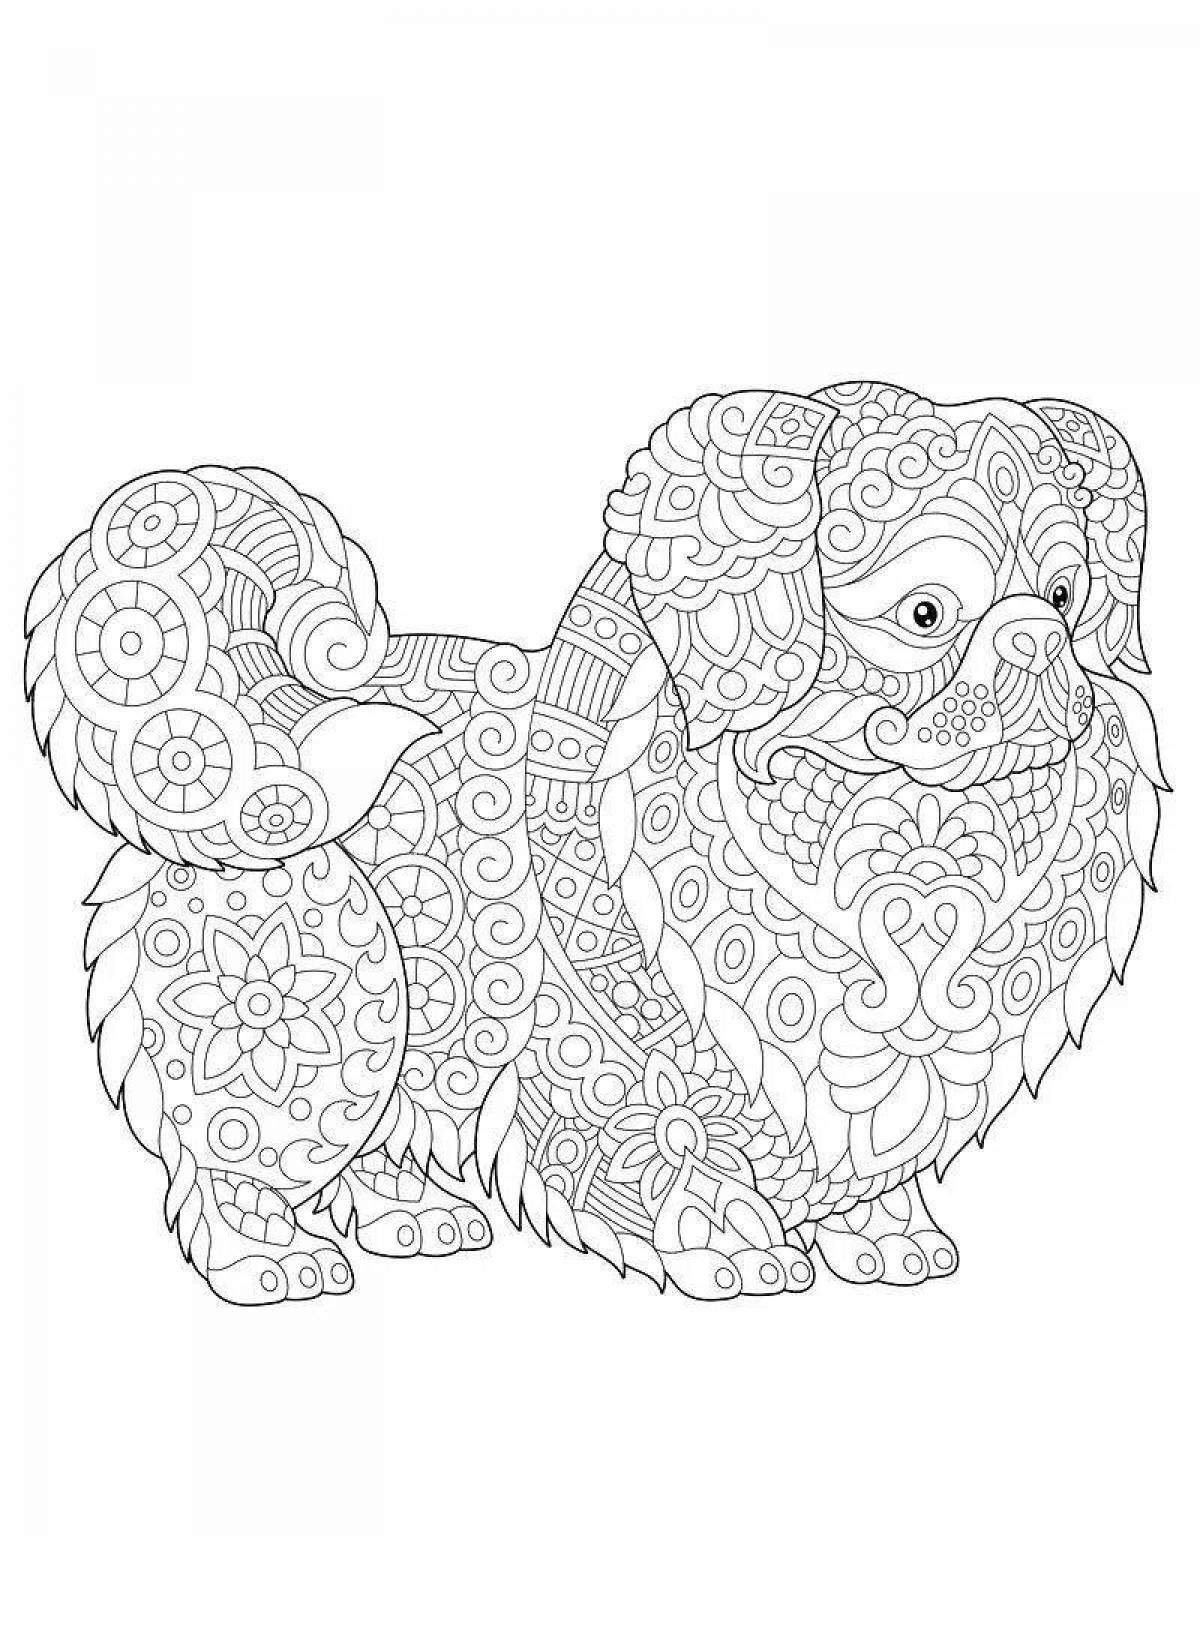 Colourful antistress coloring book